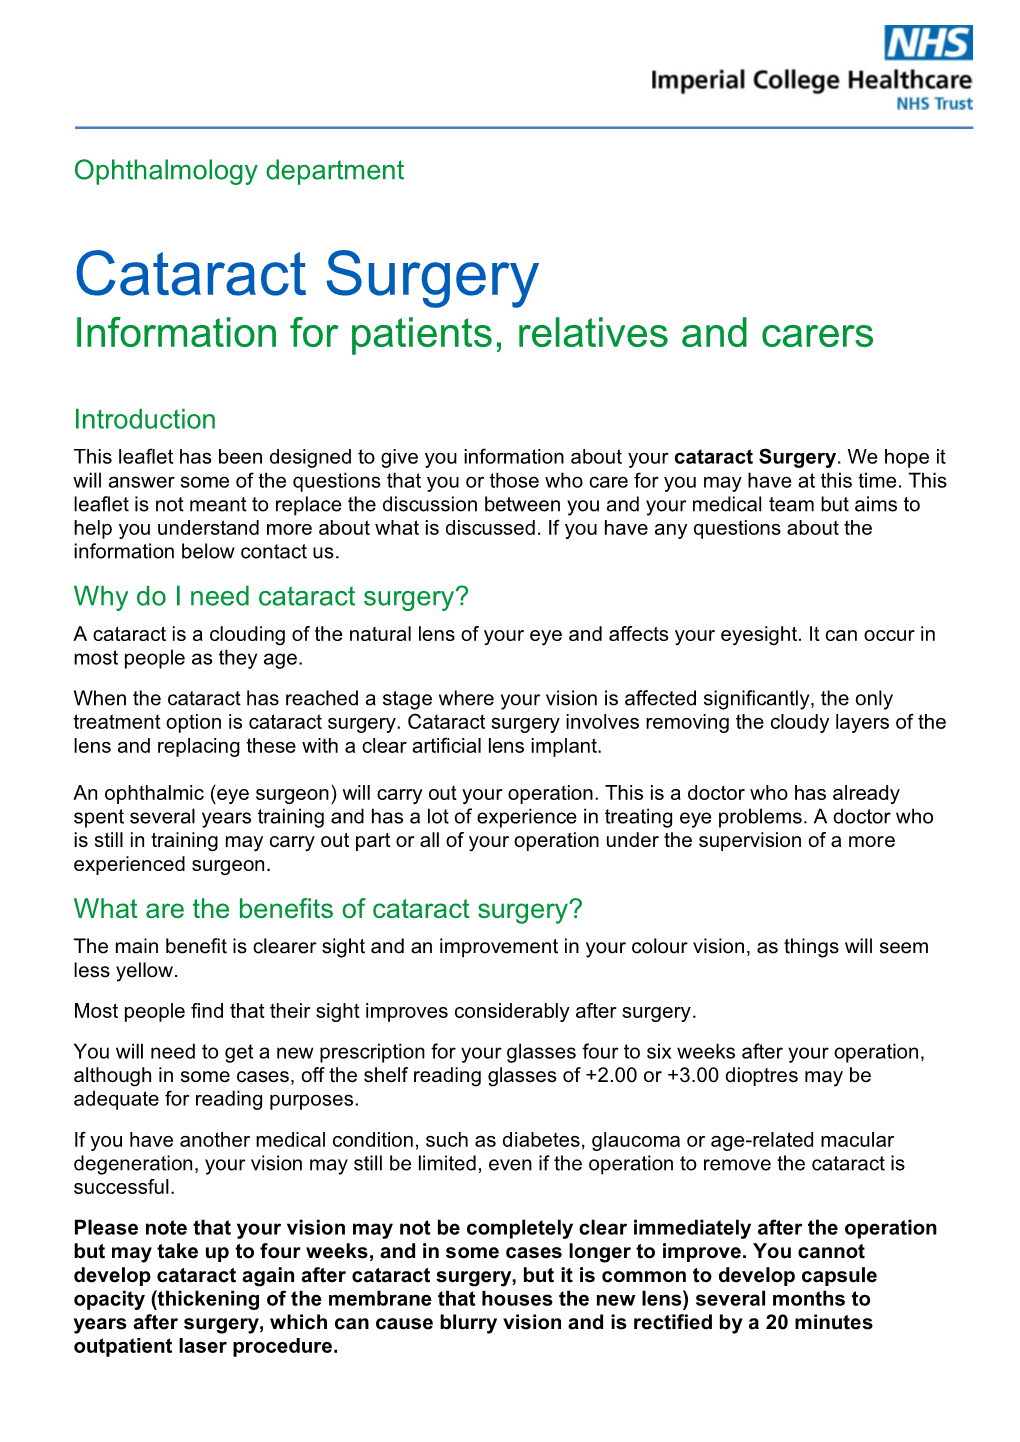 Cataract Surgery Information for Patients, Relatives and Carers